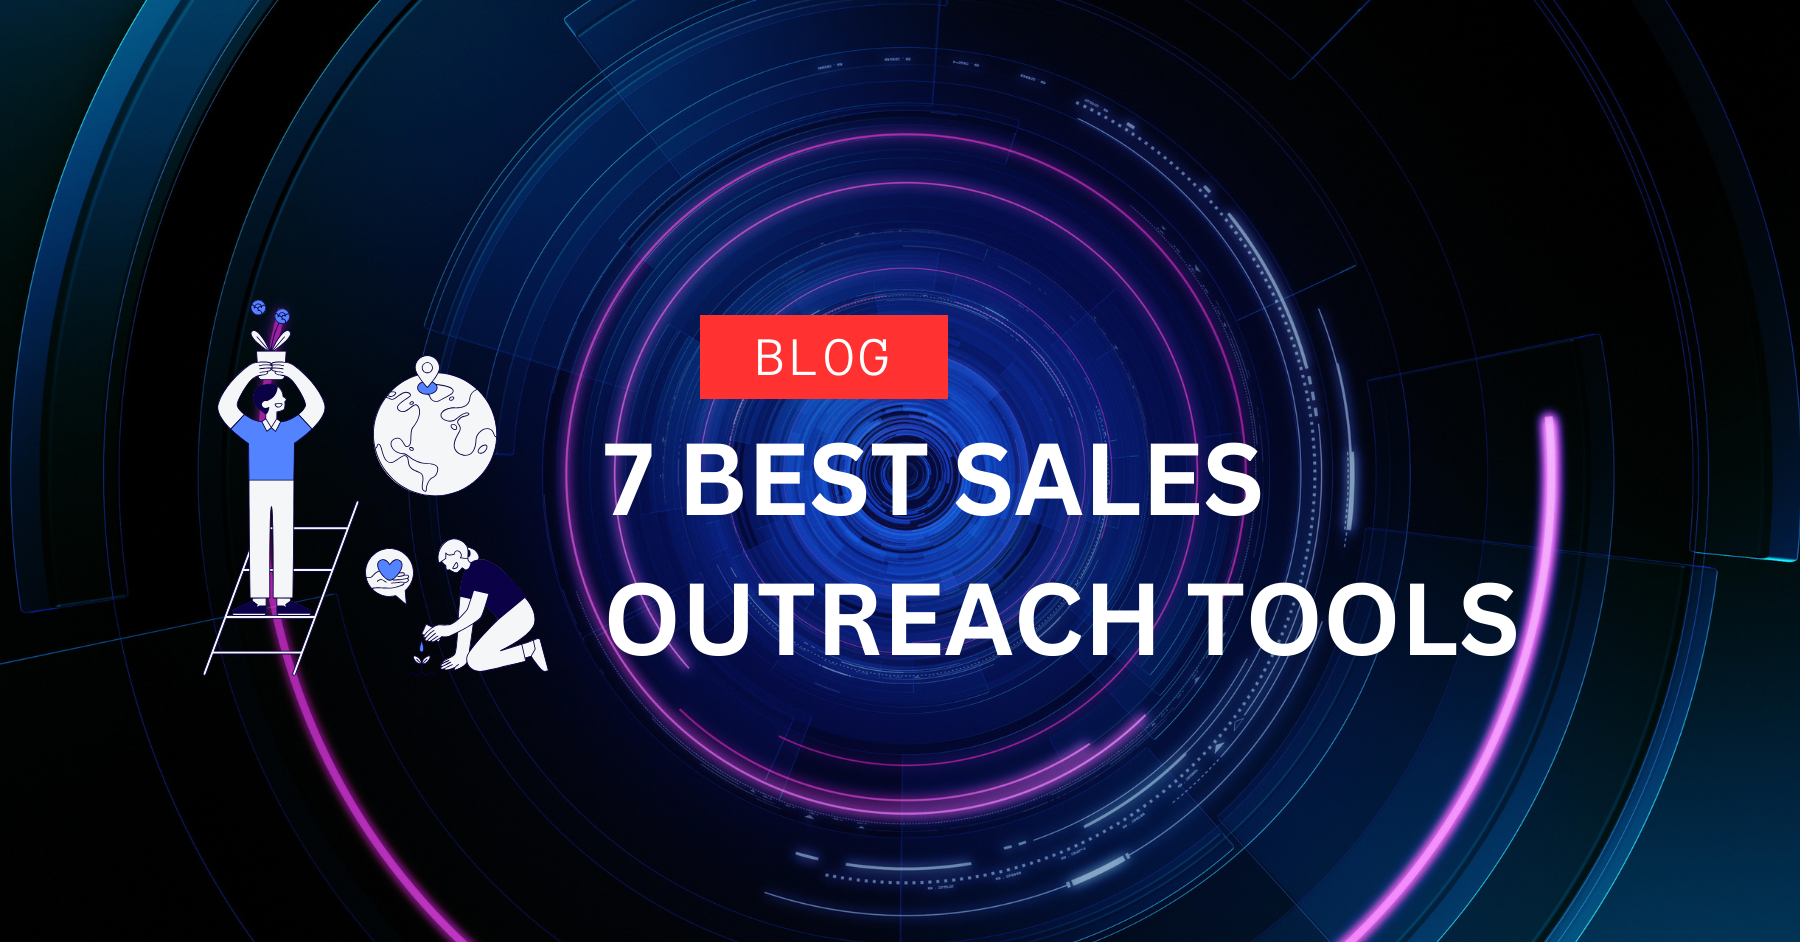 Best Sales Outreach Tools